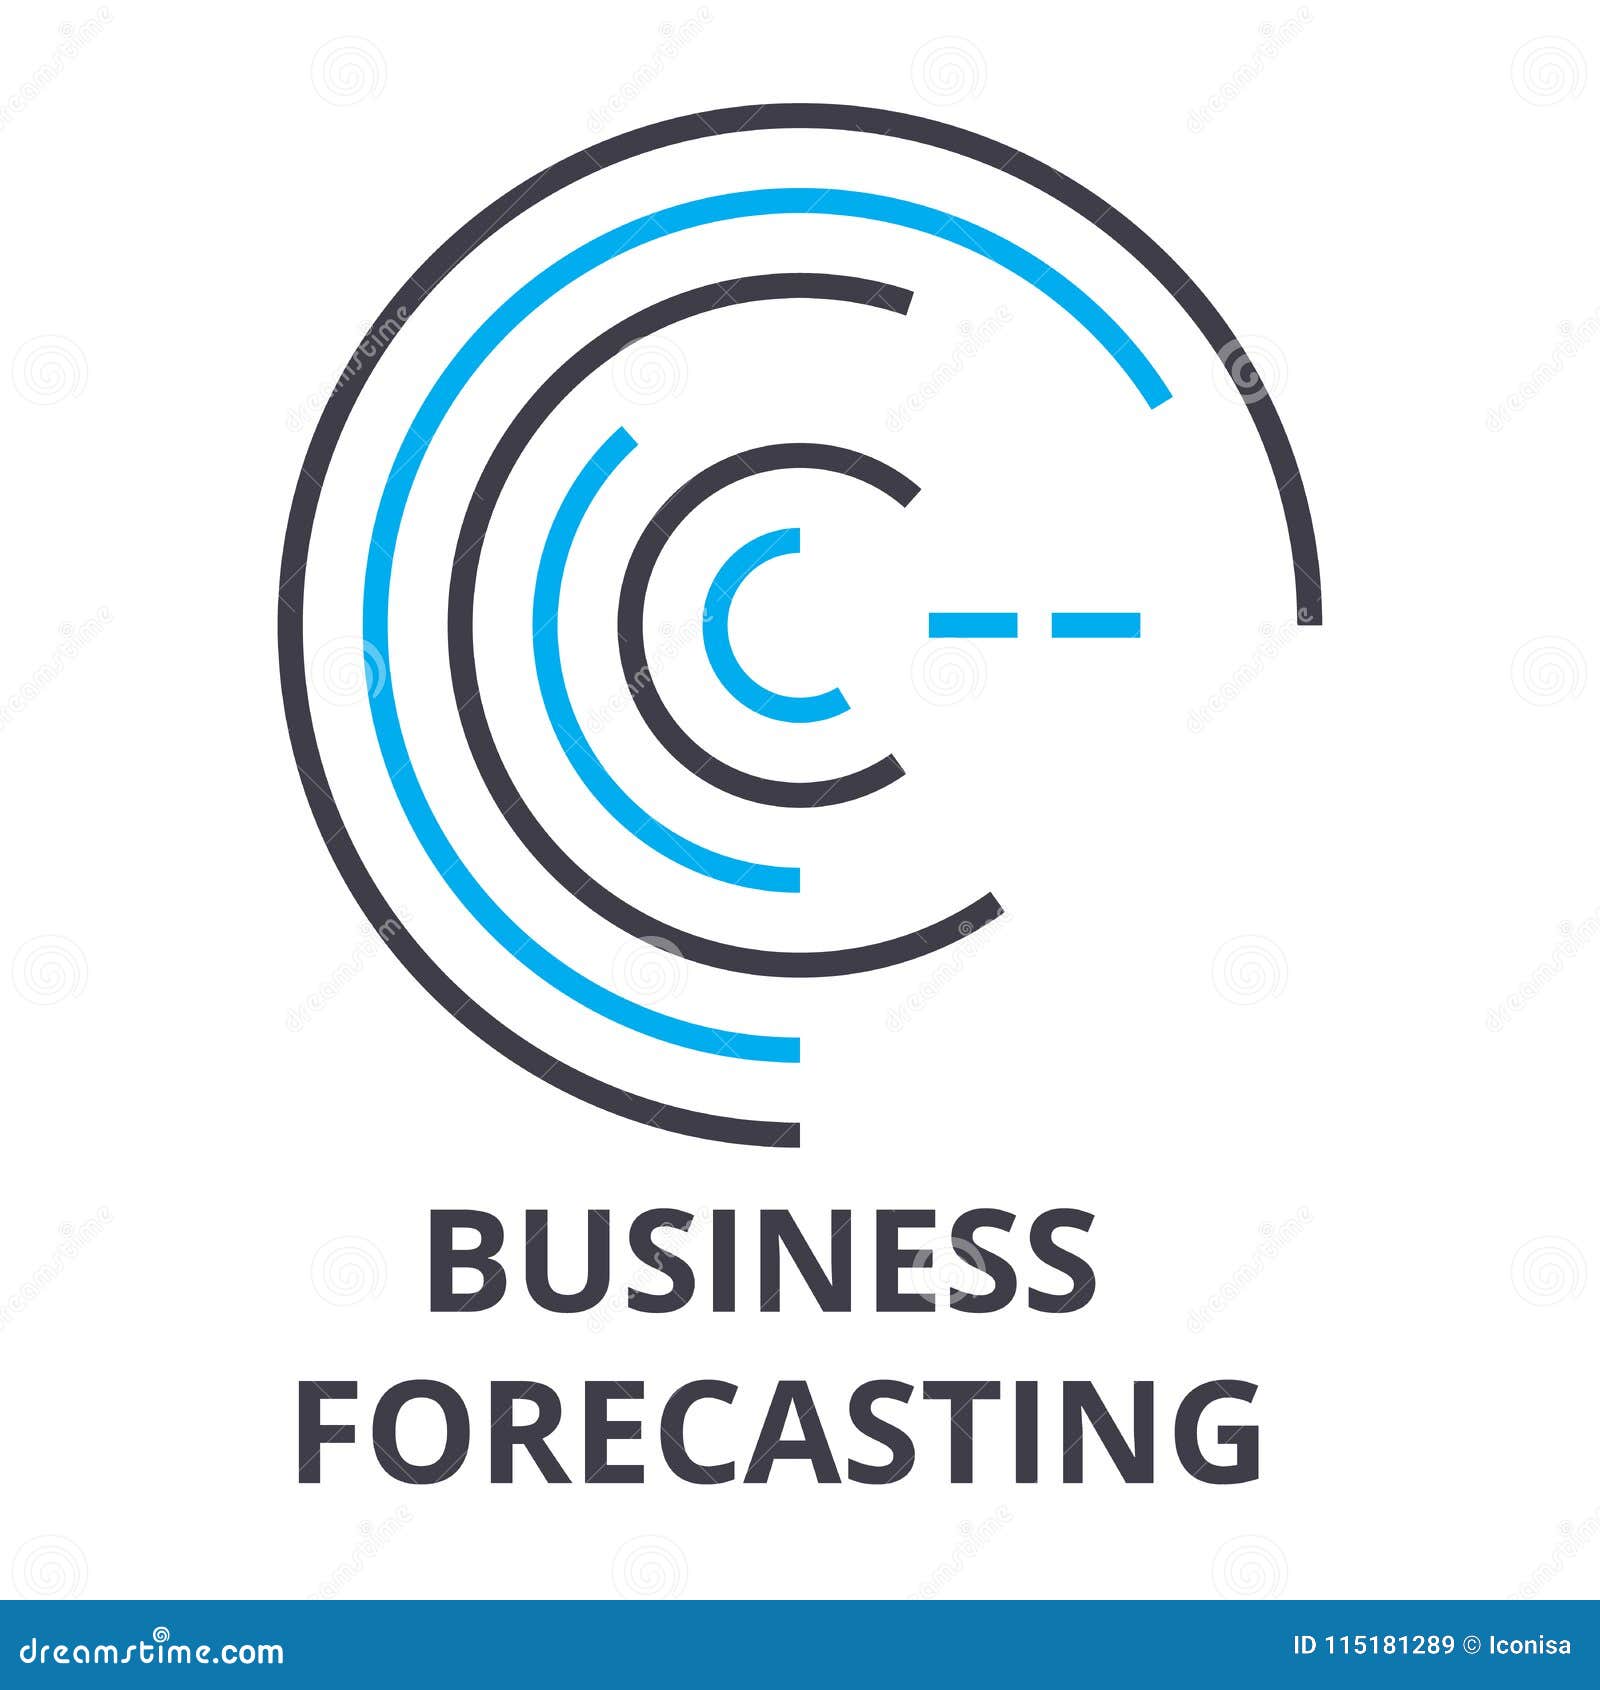 Business Forecasting Thin Line Icon, Sign, Symbol ...